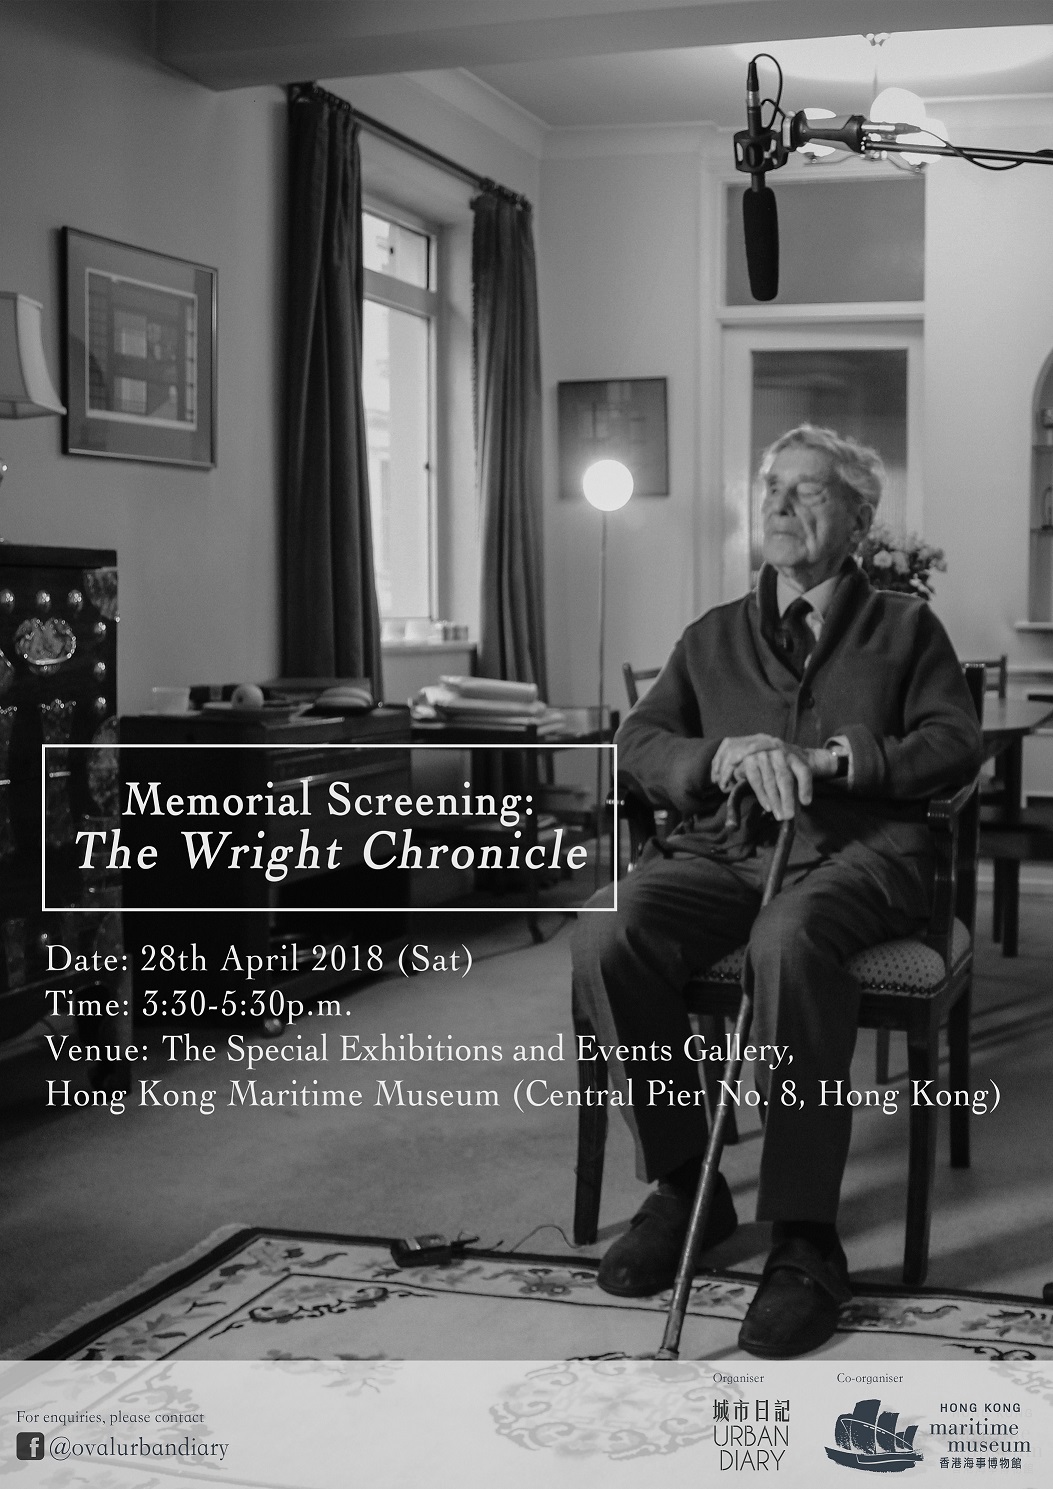 Memorial Screening: The Wright Chronicle
